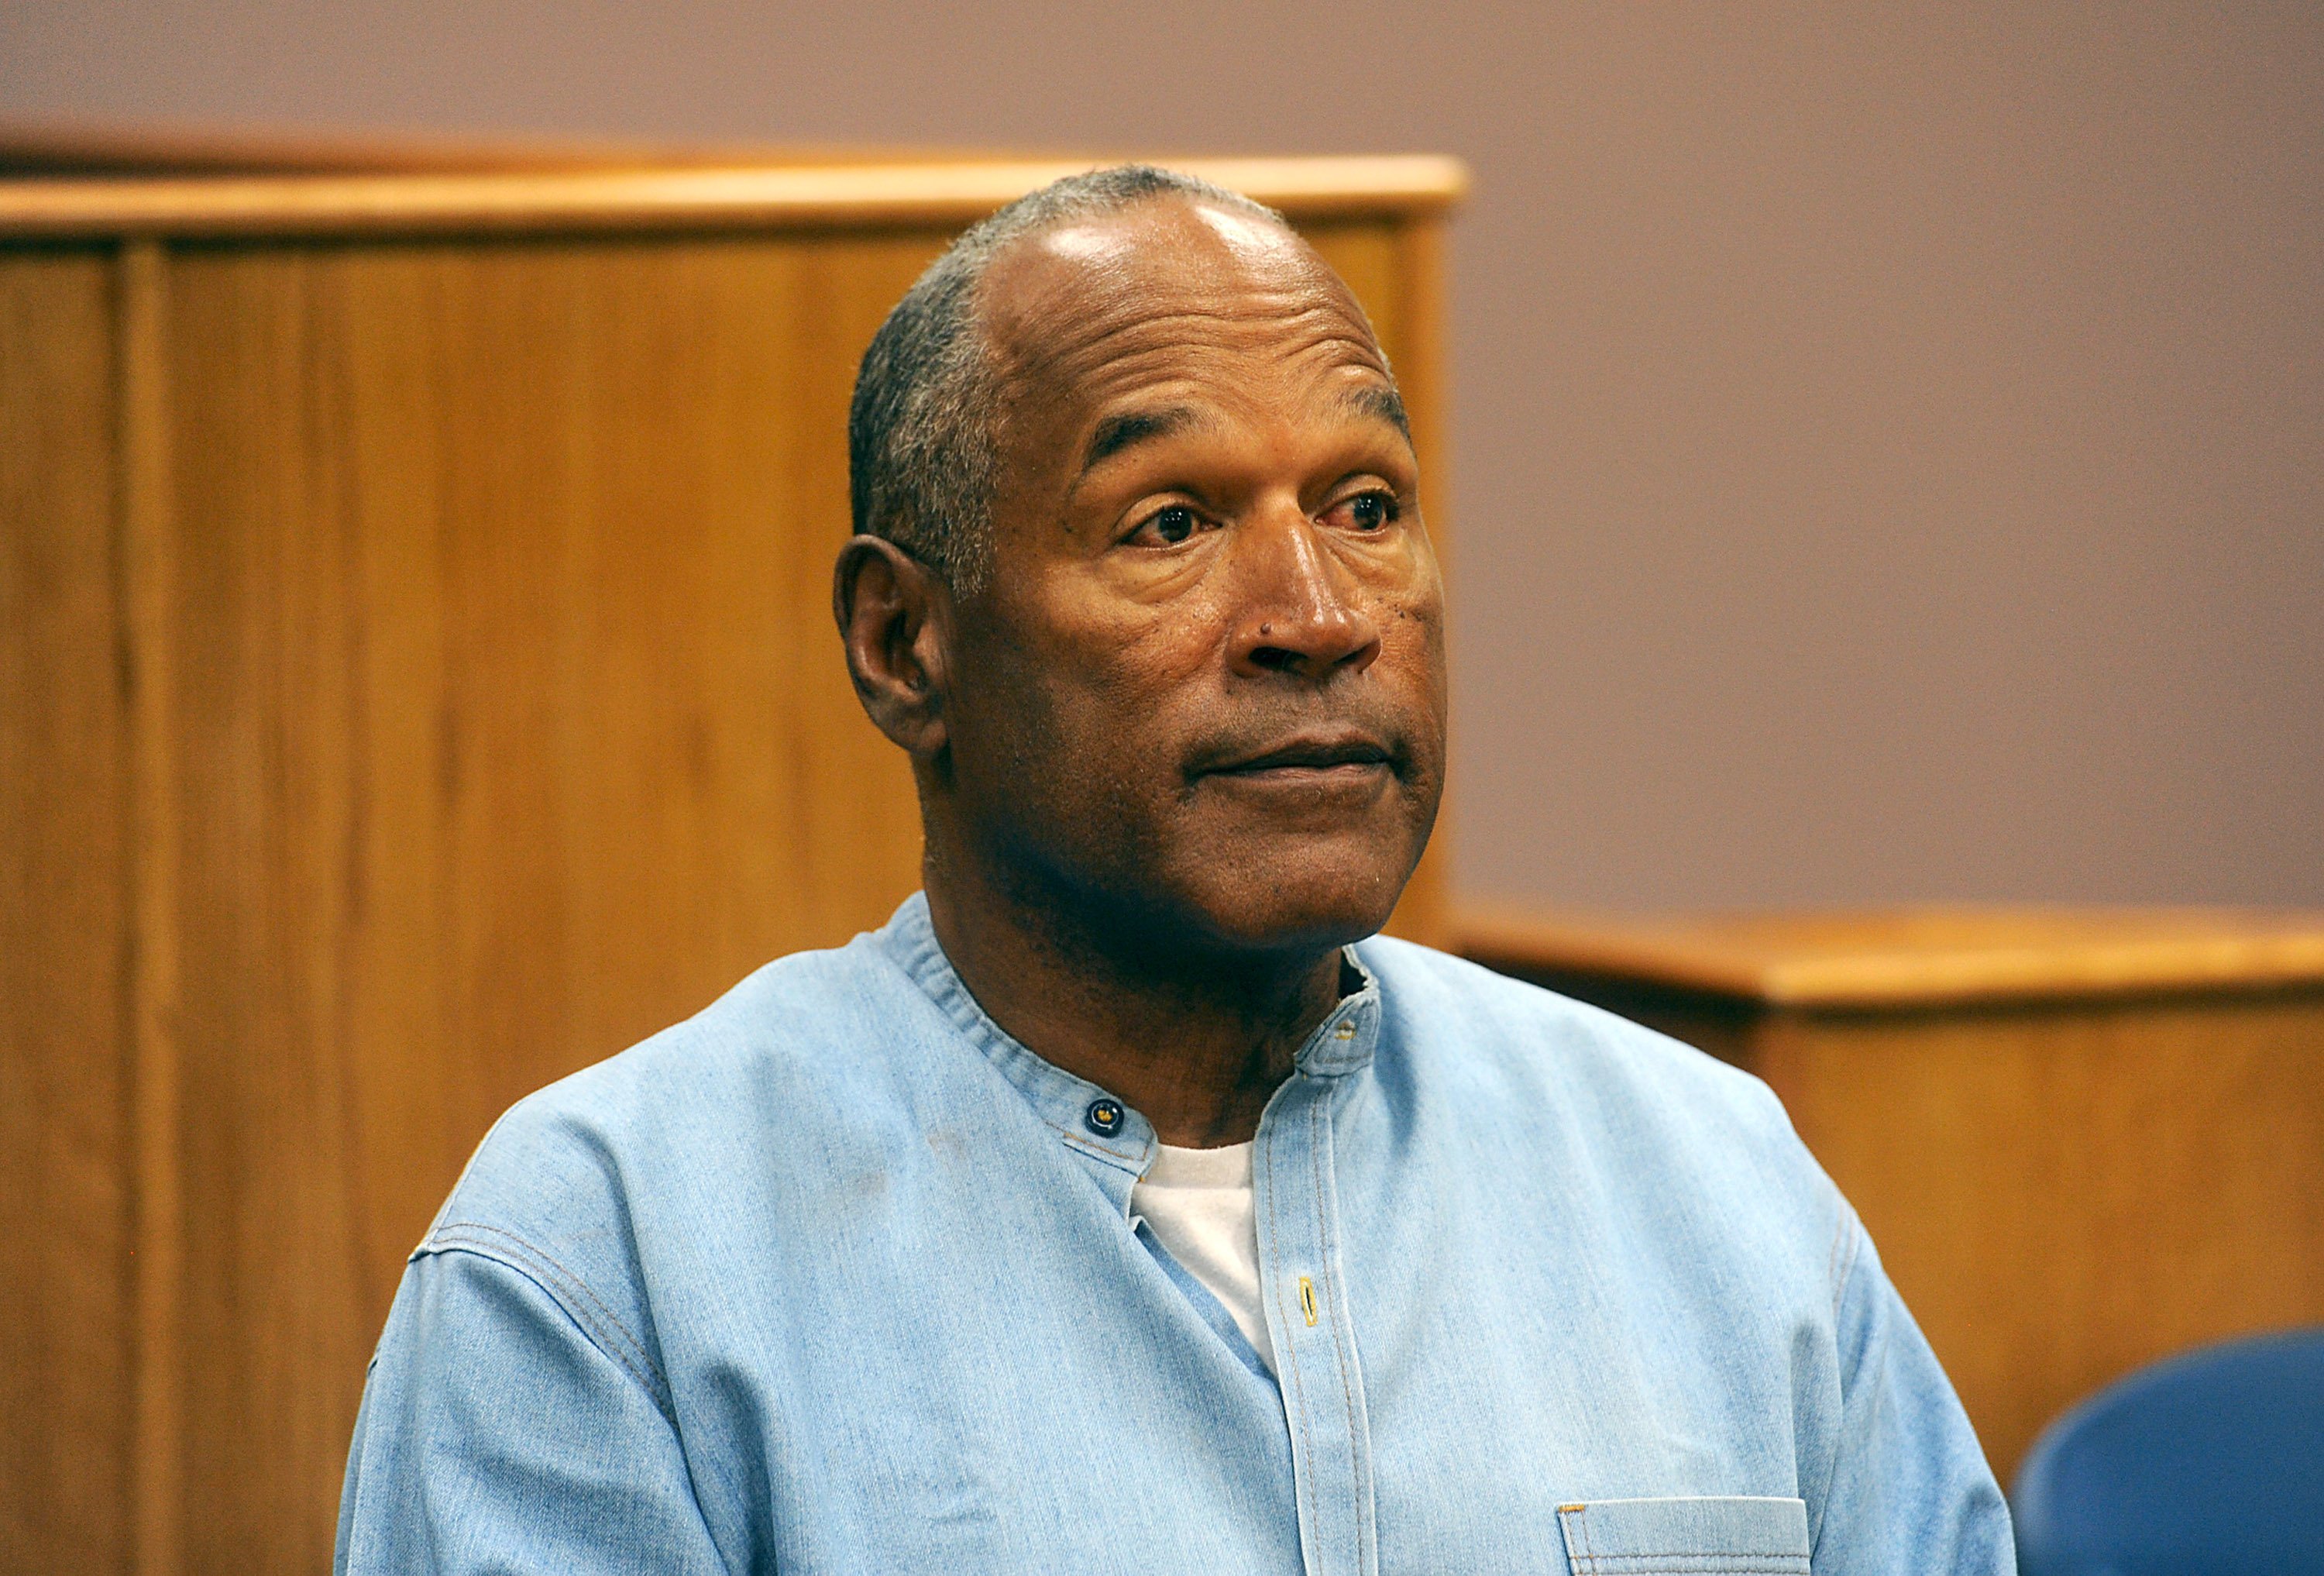 O.J. Simpson attends a parole hearing at Lovelock Correctional Center July 20, 2017. | Photo: GettyImages